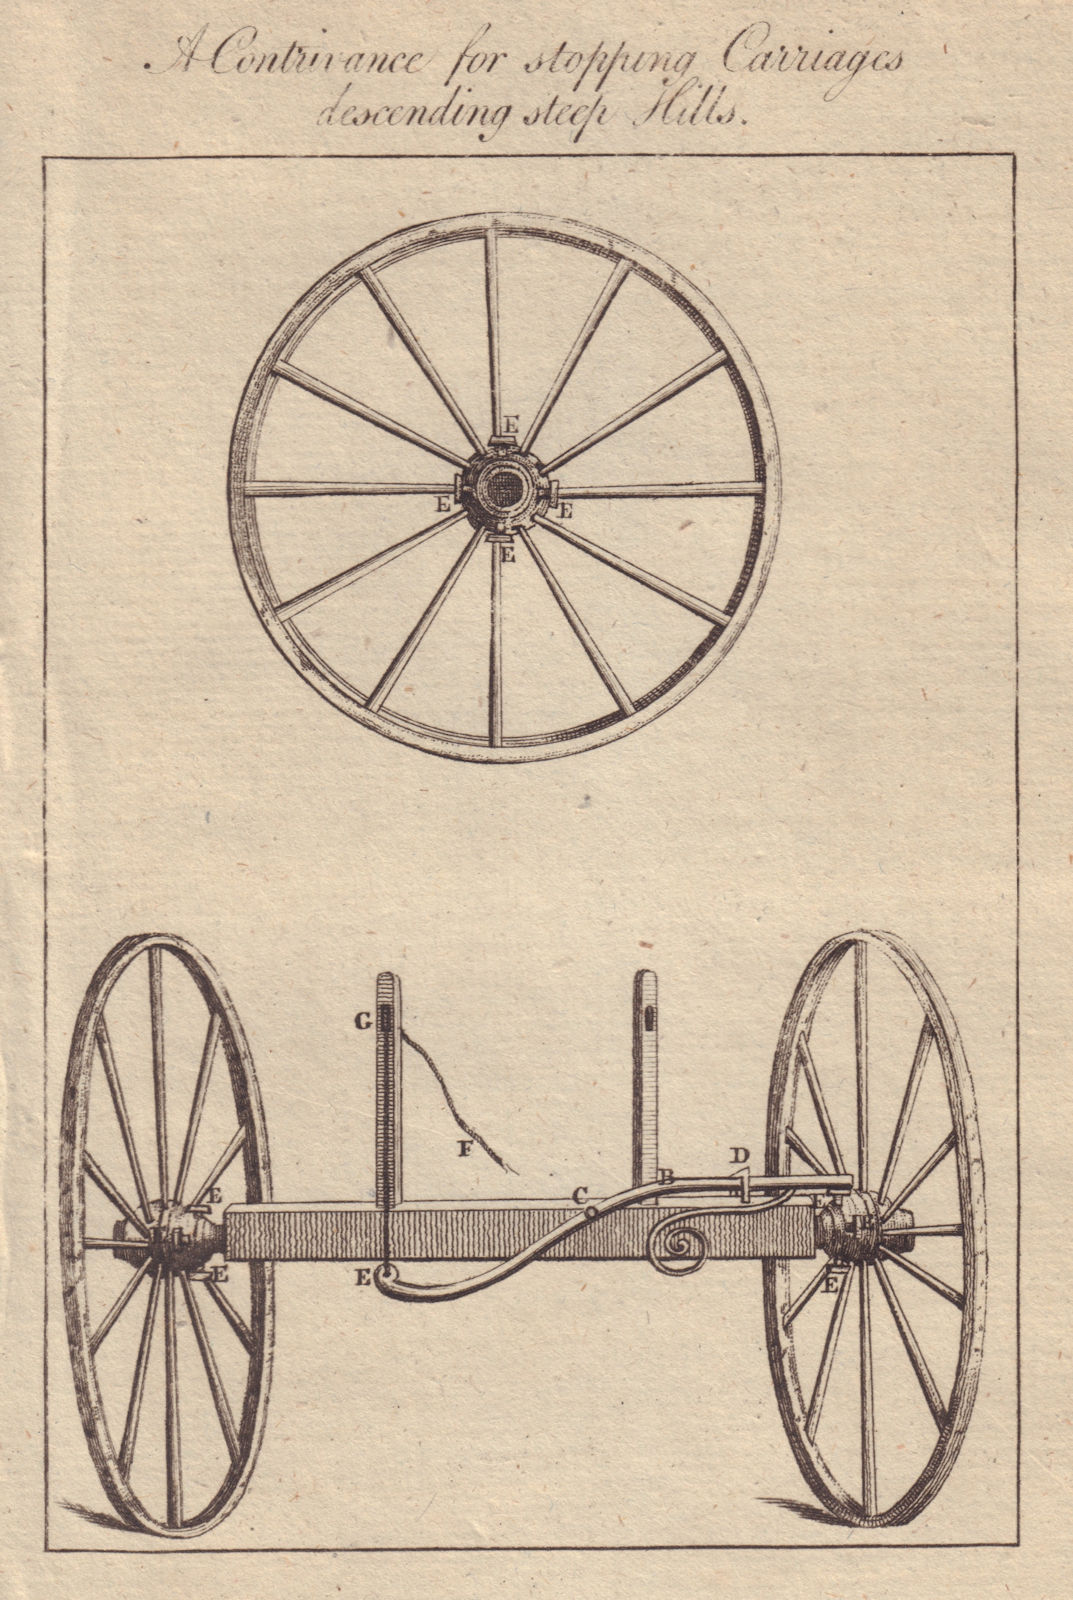 A Contrivance for stopping Carriages descending Steep Hills. Transport 1773